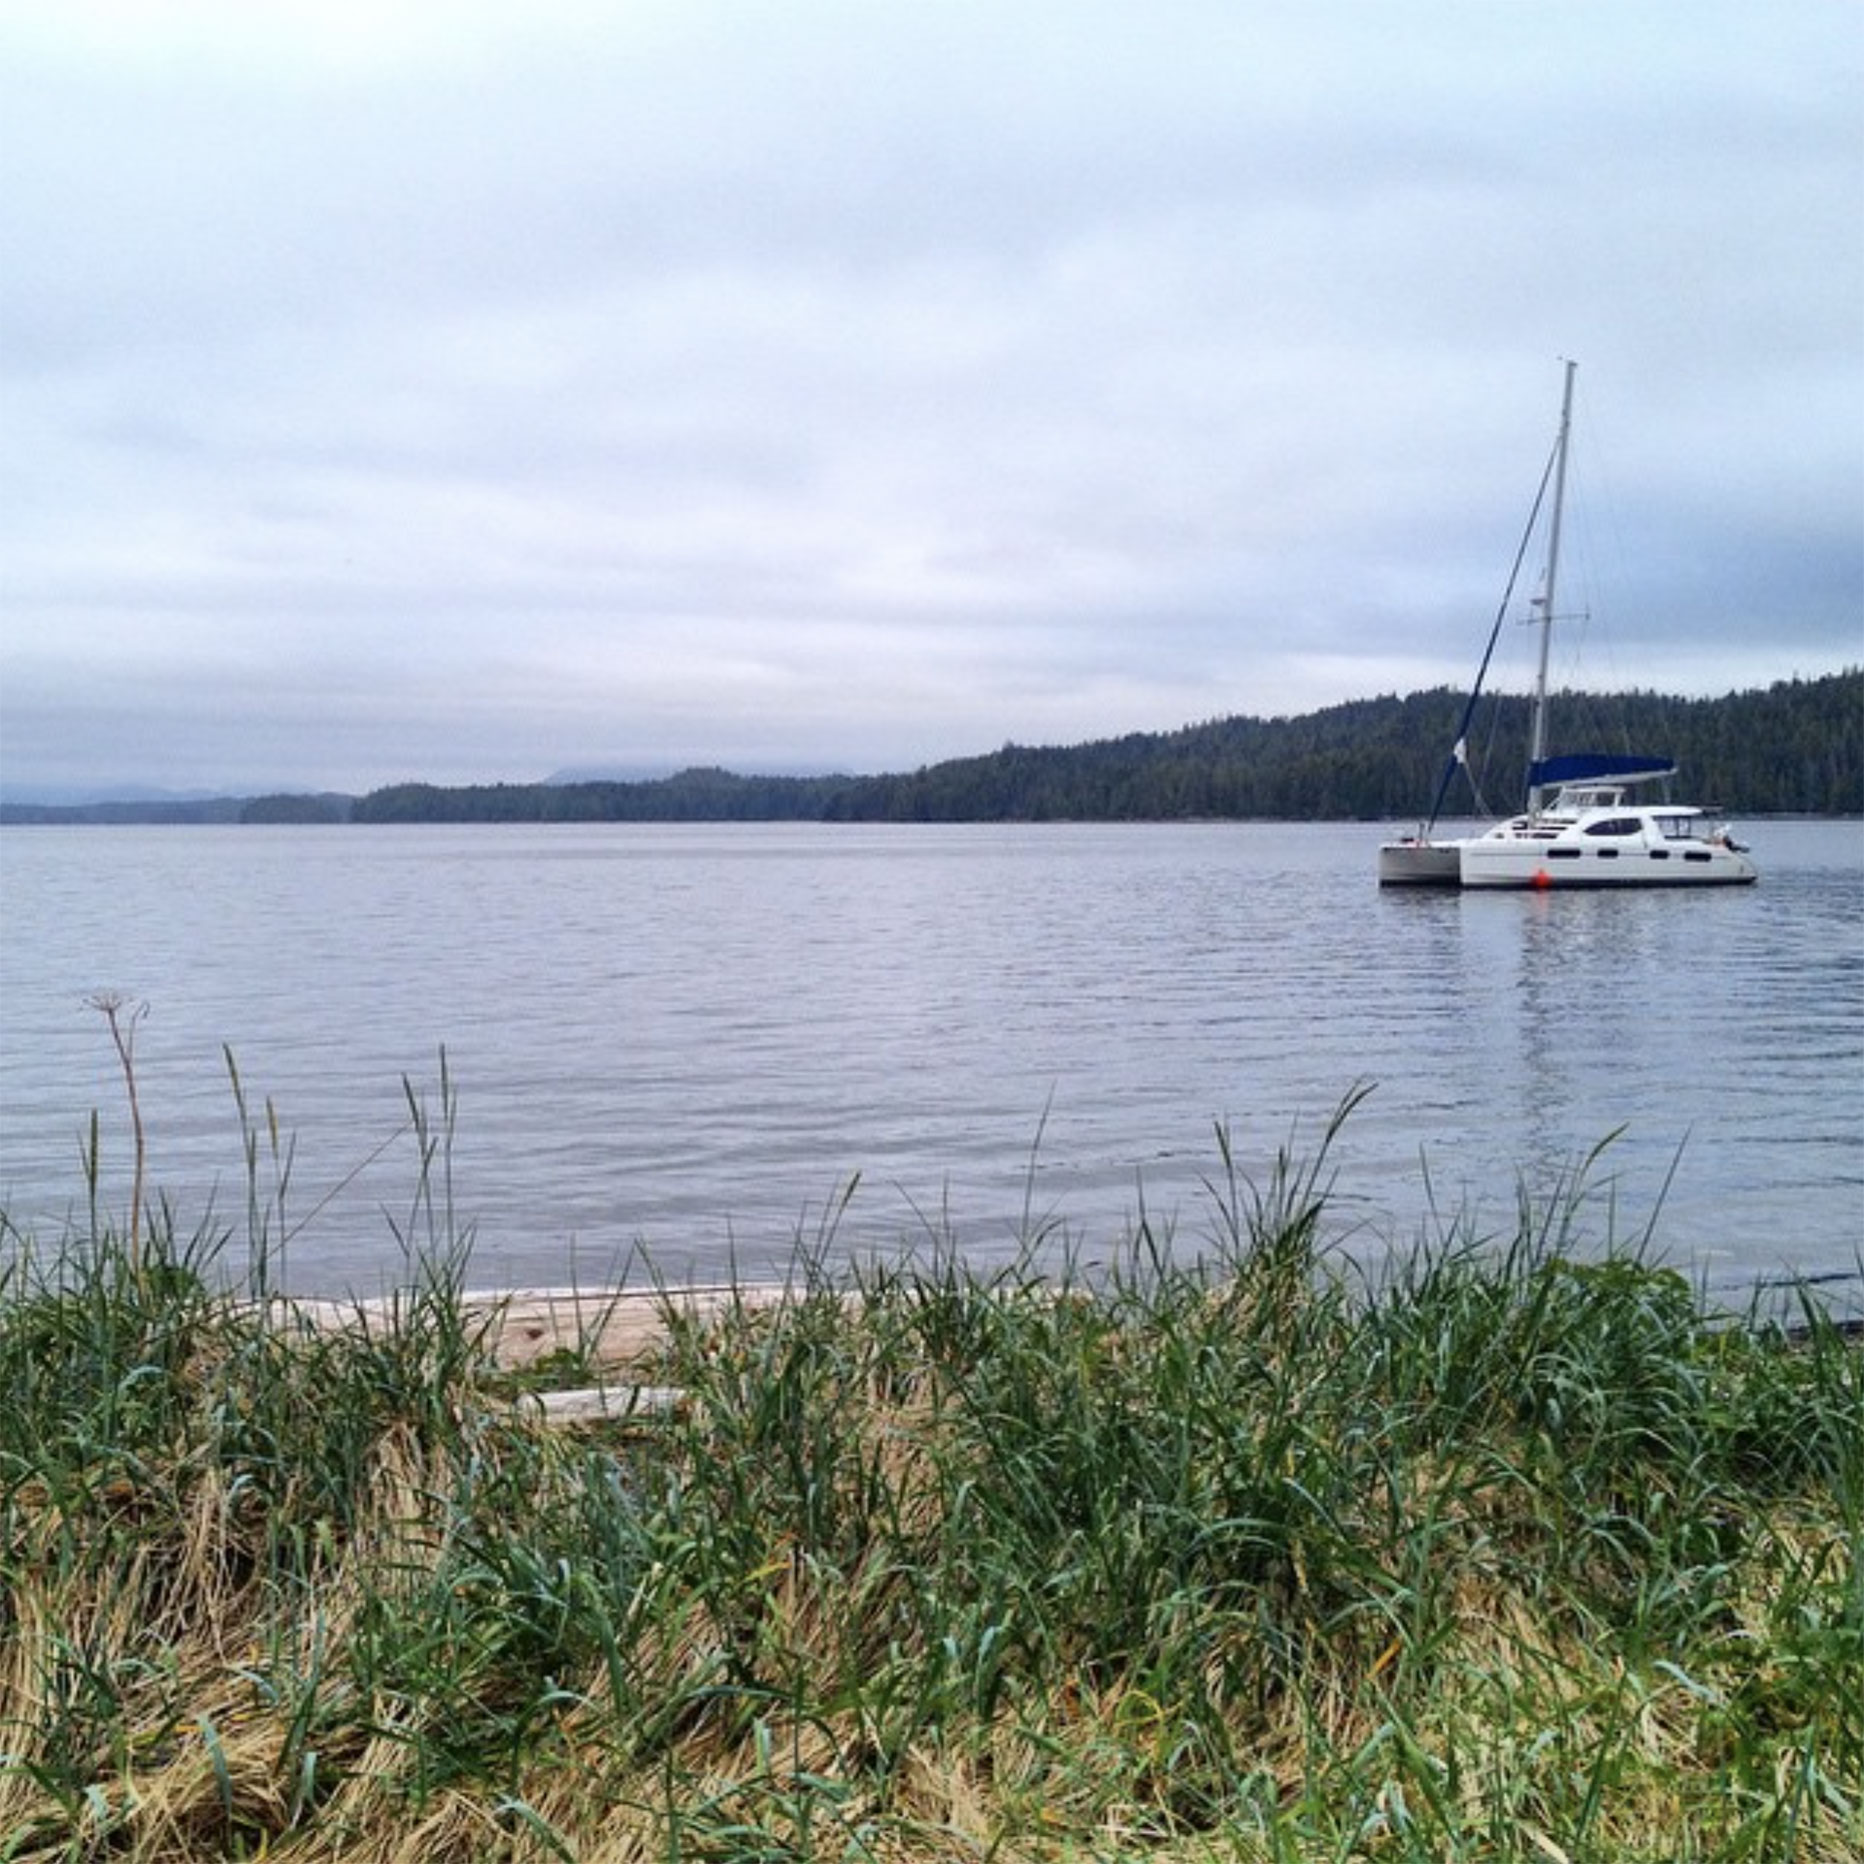 A photo of Ian McAllister's catamaran in the water. The grassy shoreline is visible in the foreground.